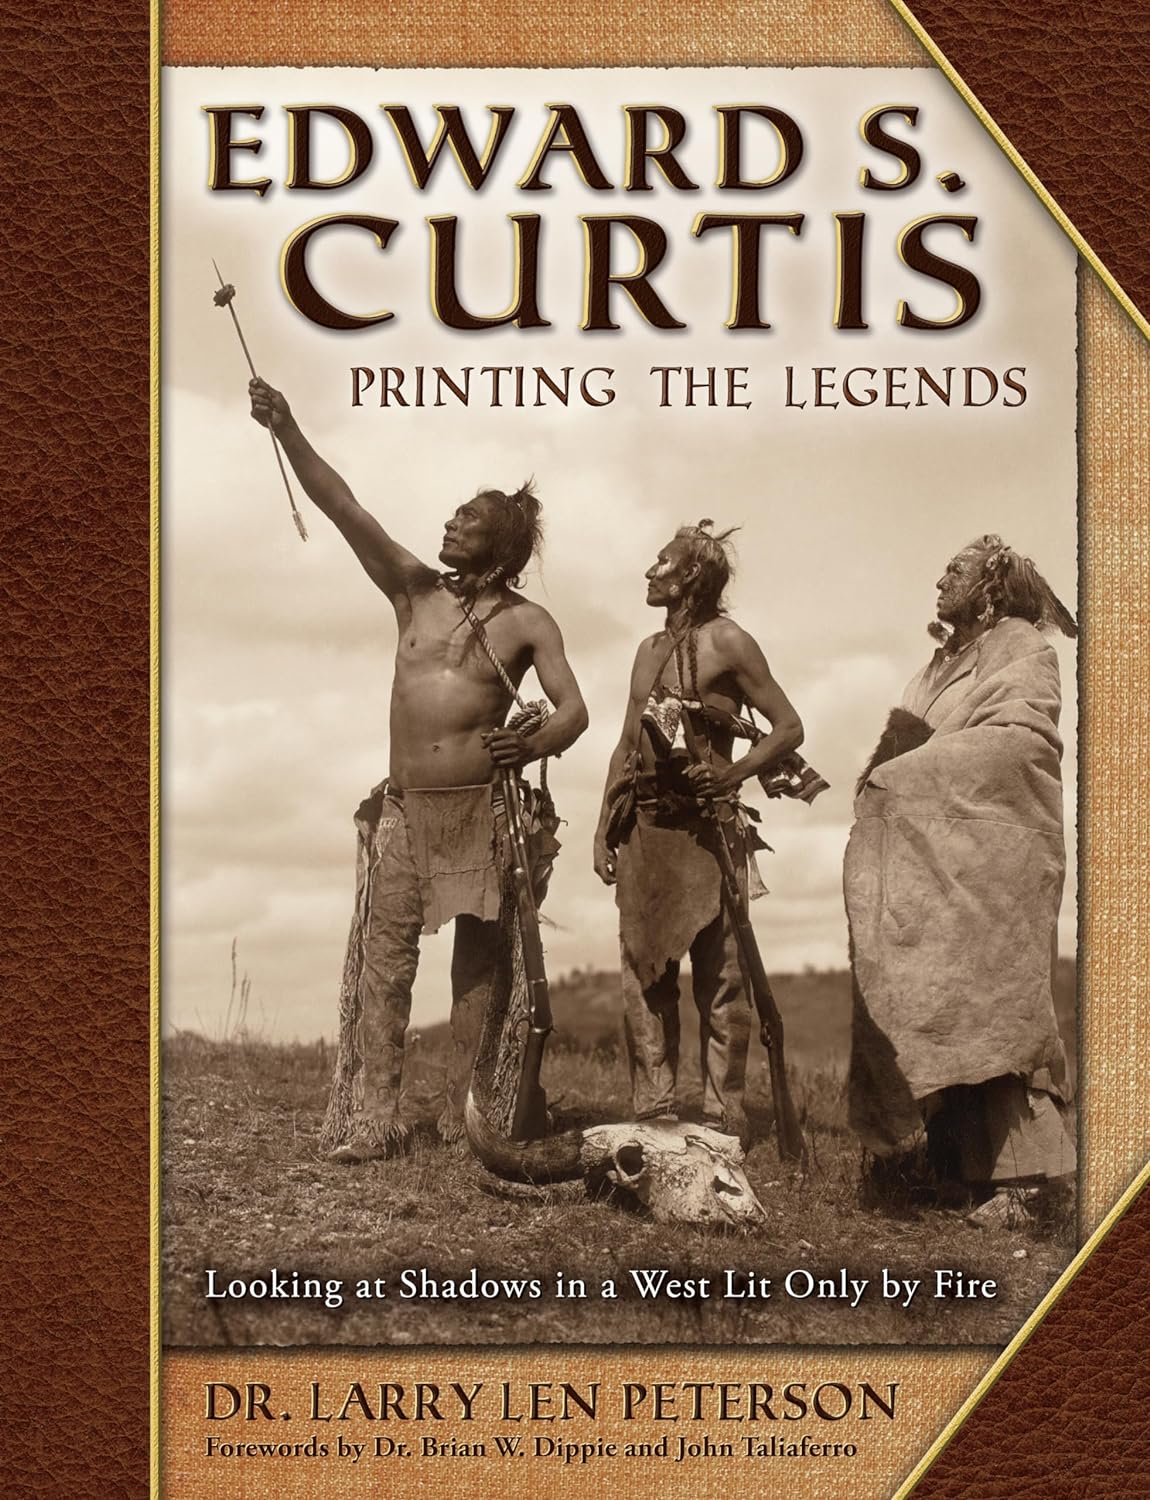 Edward Curtis Printing the Legends book cover